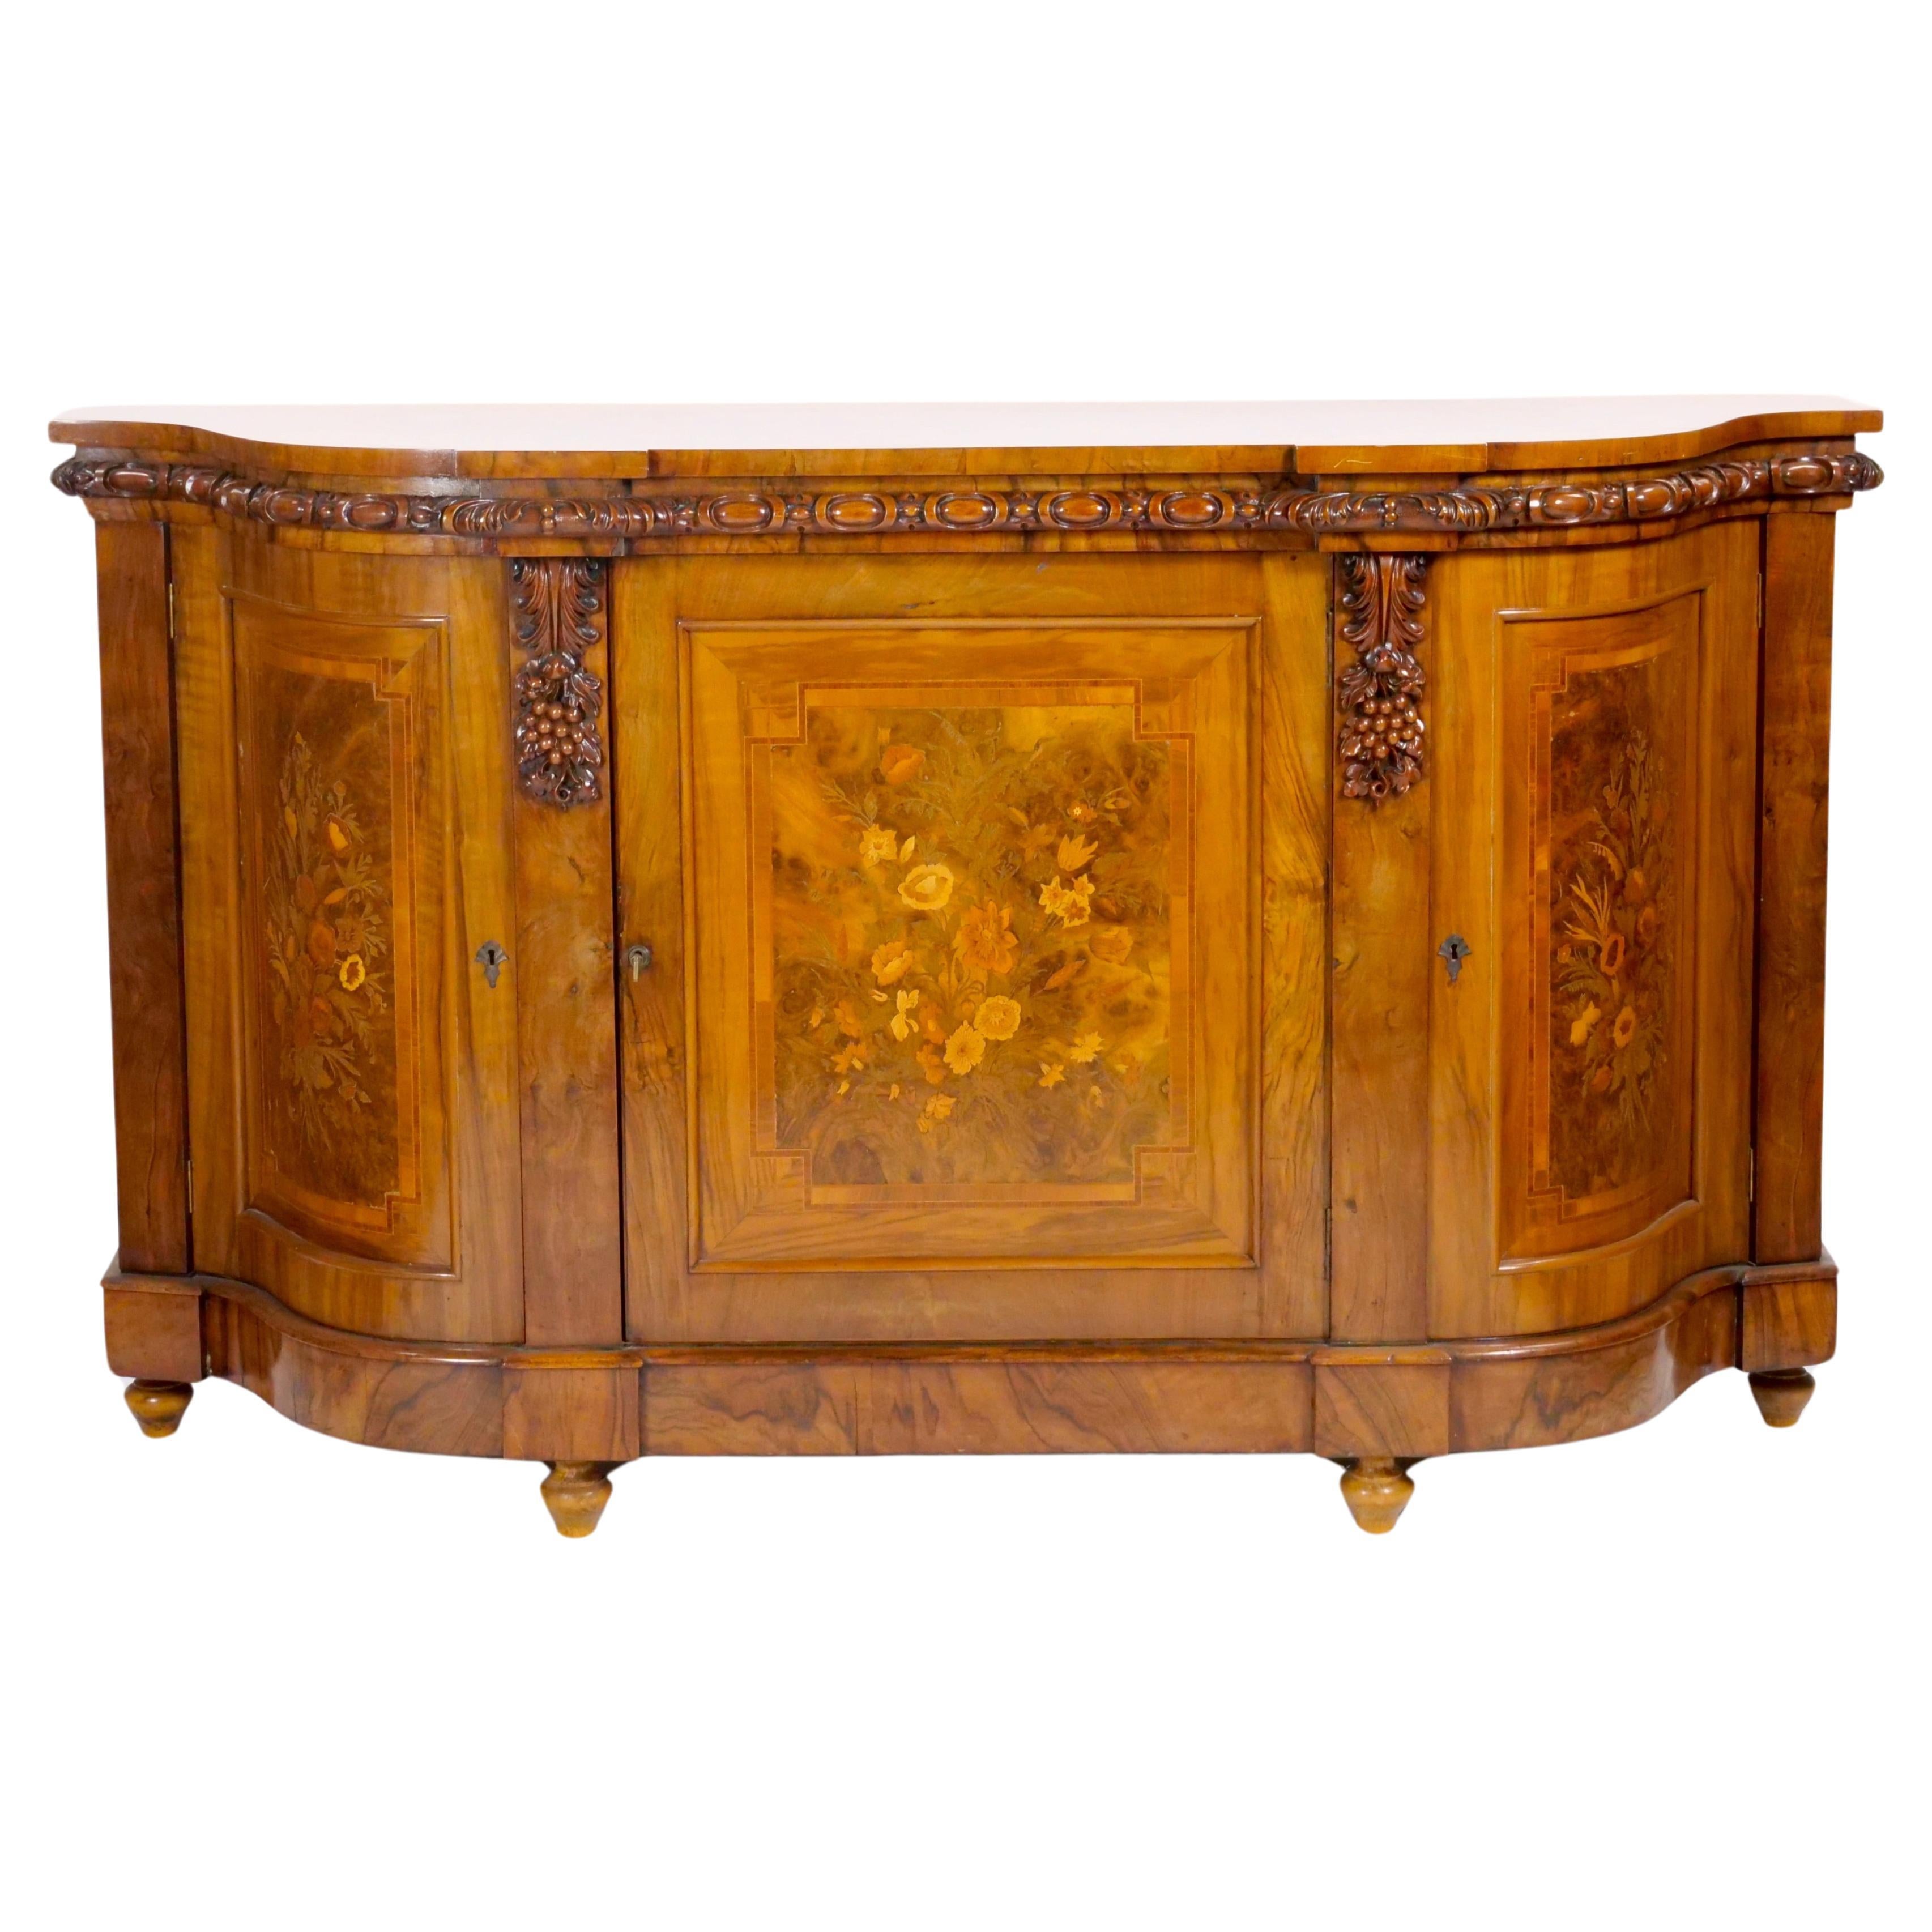 Early 19th Century English Victorian Style Walnut Marquetry Credenza / Sideboard For Sale